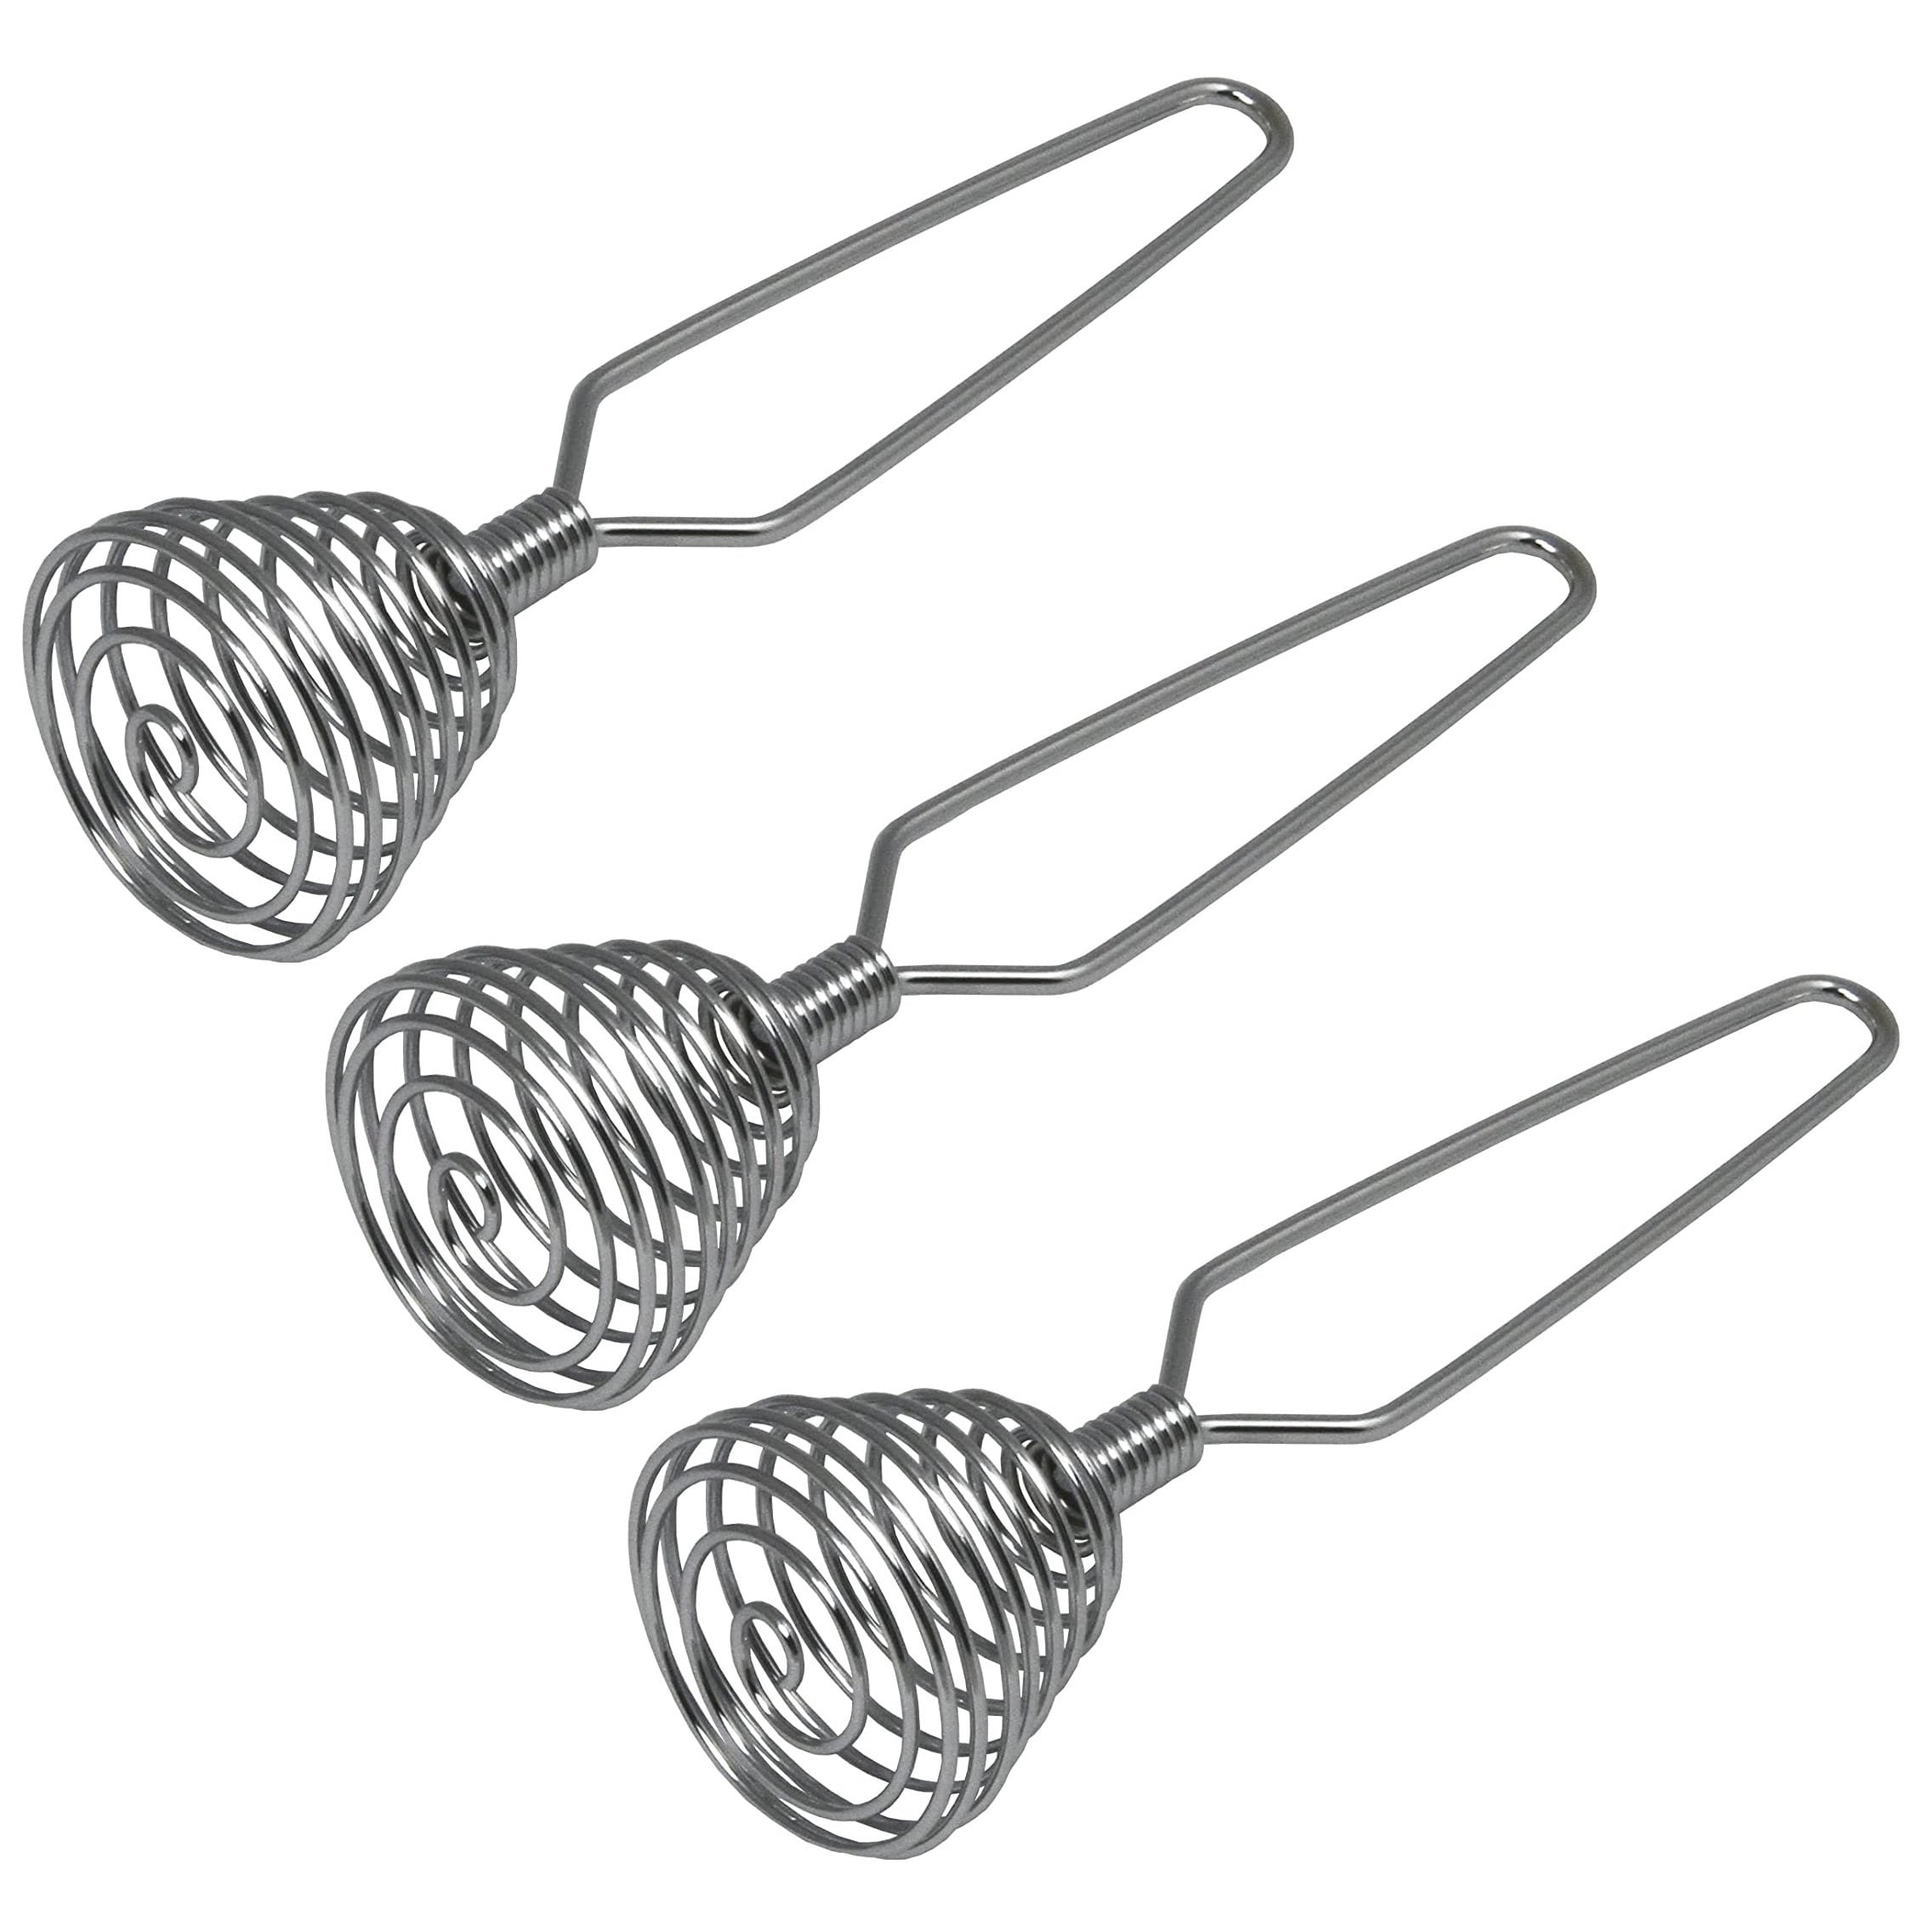 https://ak1.ostkcdn.com/images/products/is/images/direct/48c3c71f29754696ebe99ed2b00167126dade564/Chef-Craft-7%22-Steel-Spring-Coil-Whisk%2C-French-Whisk---Great-For-Hand-Mixing-Eggs%2C-Cream%2C-Gravy.jpg